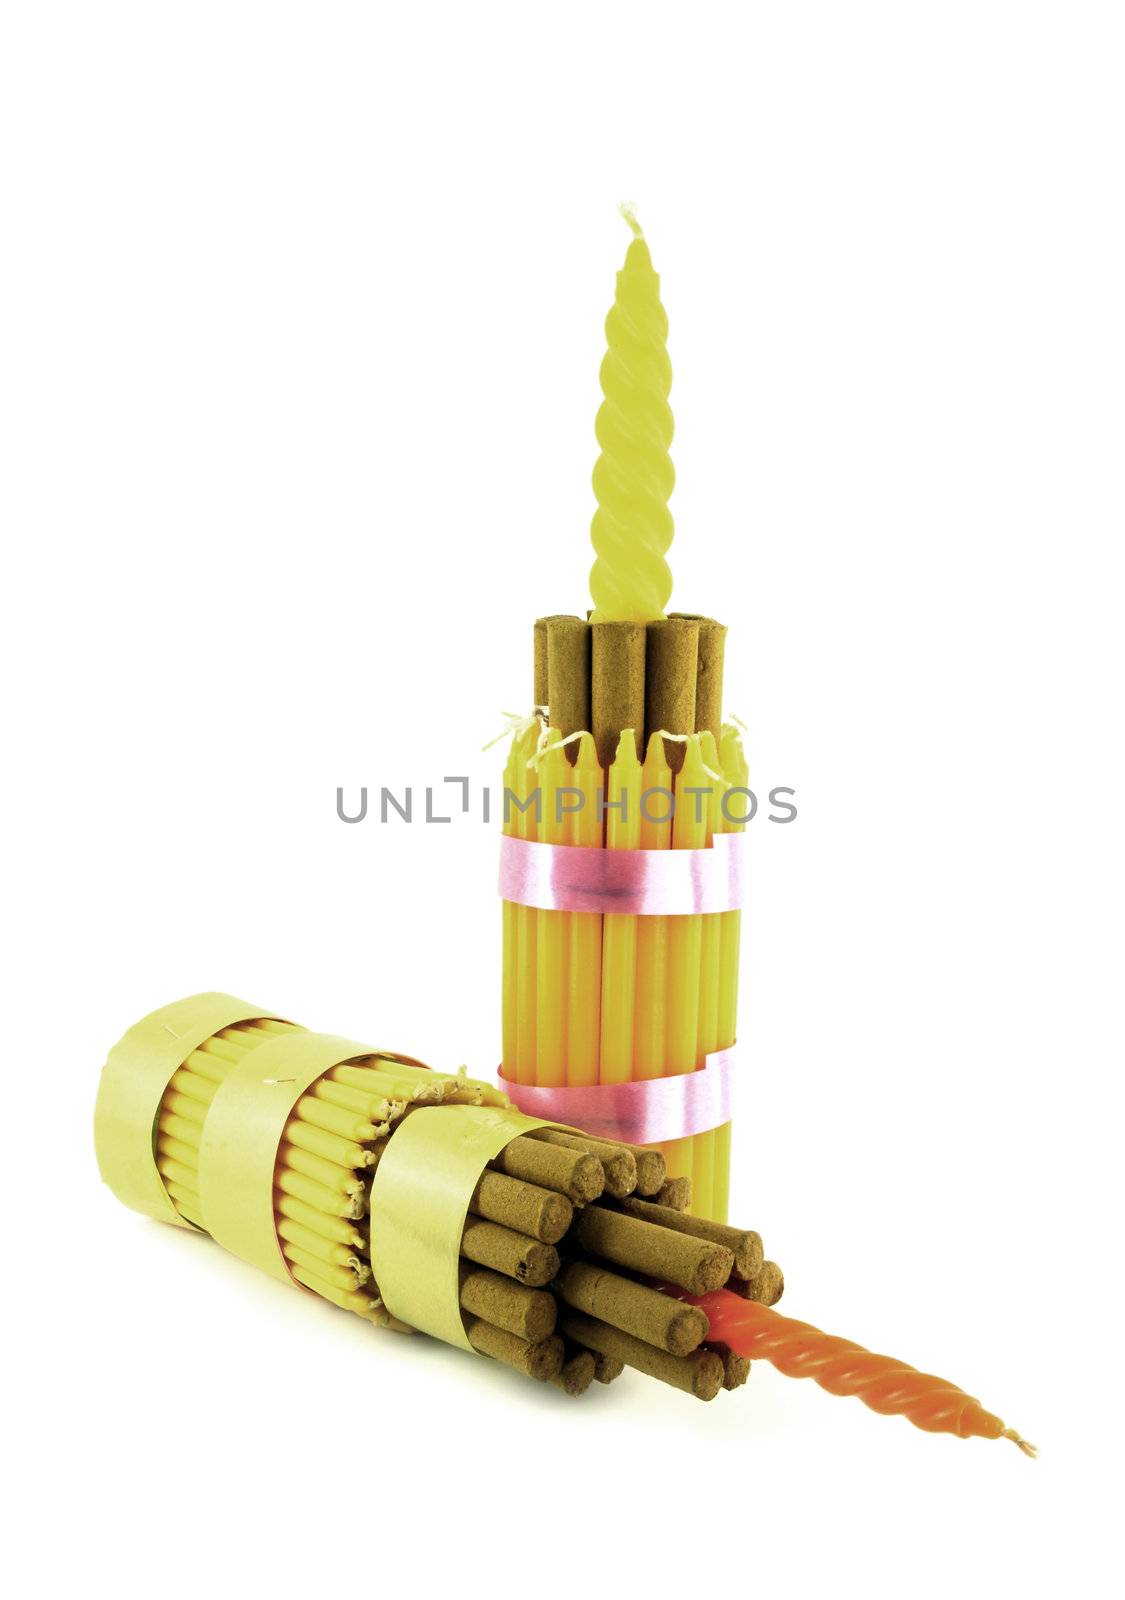 Incense and Candle on white background for Loy Kratong festival, by geargodz